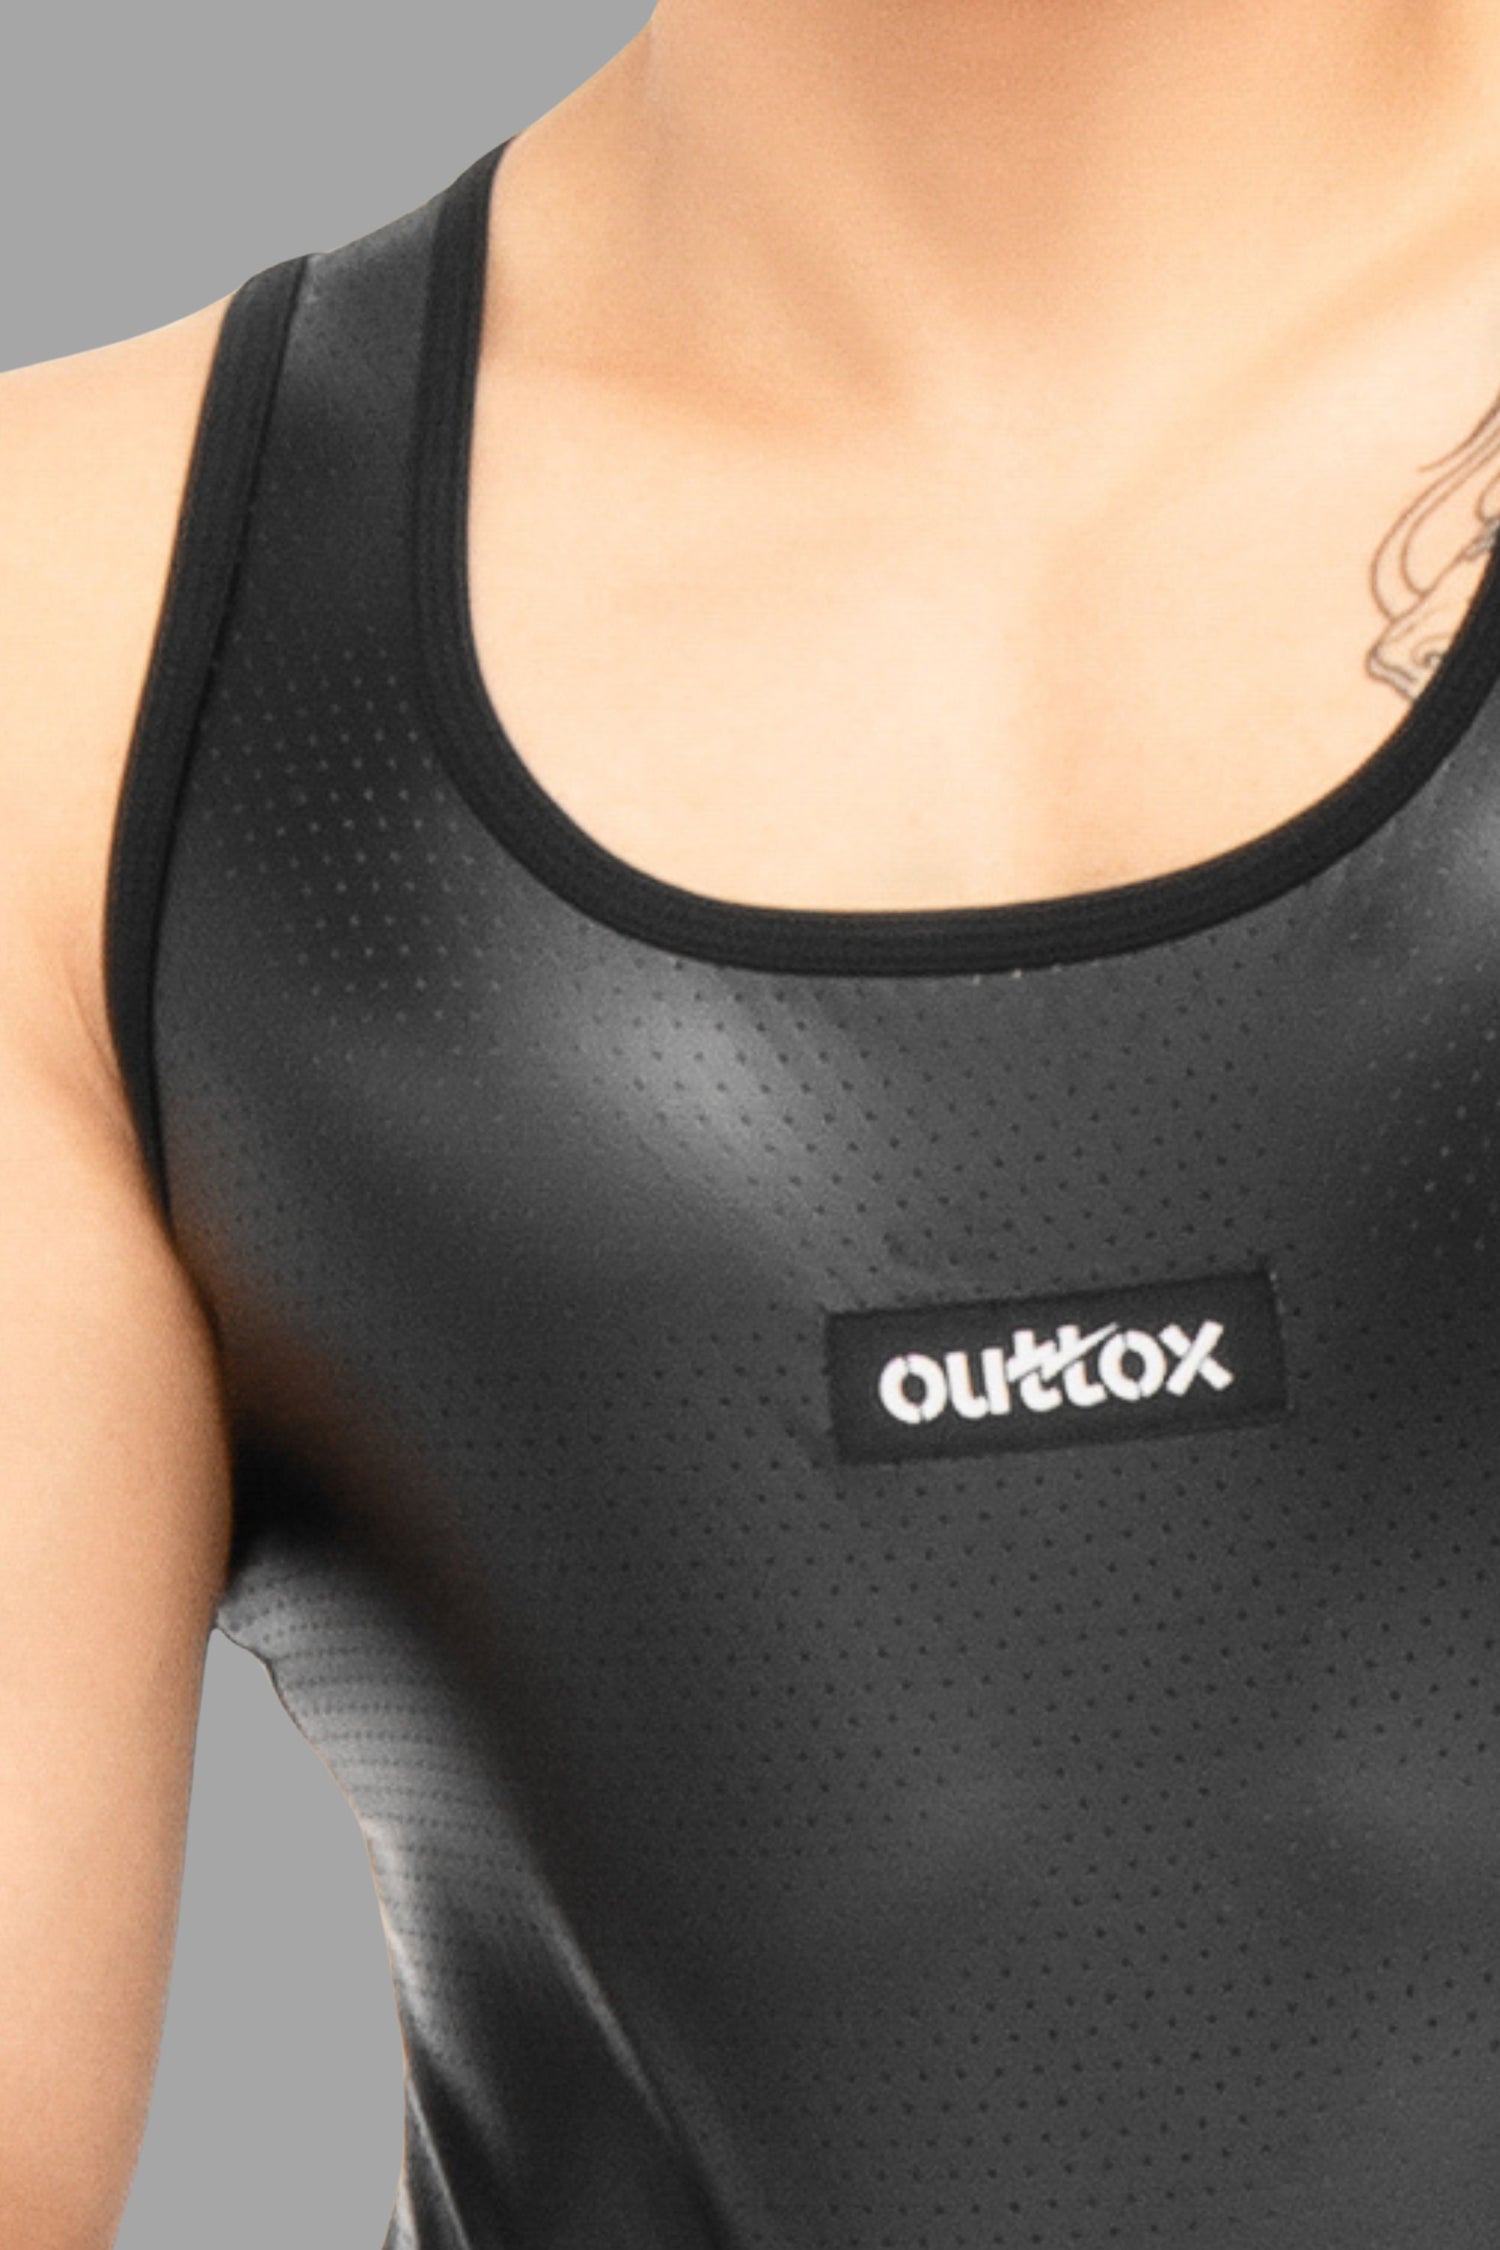 Outtox. Tank top. Black